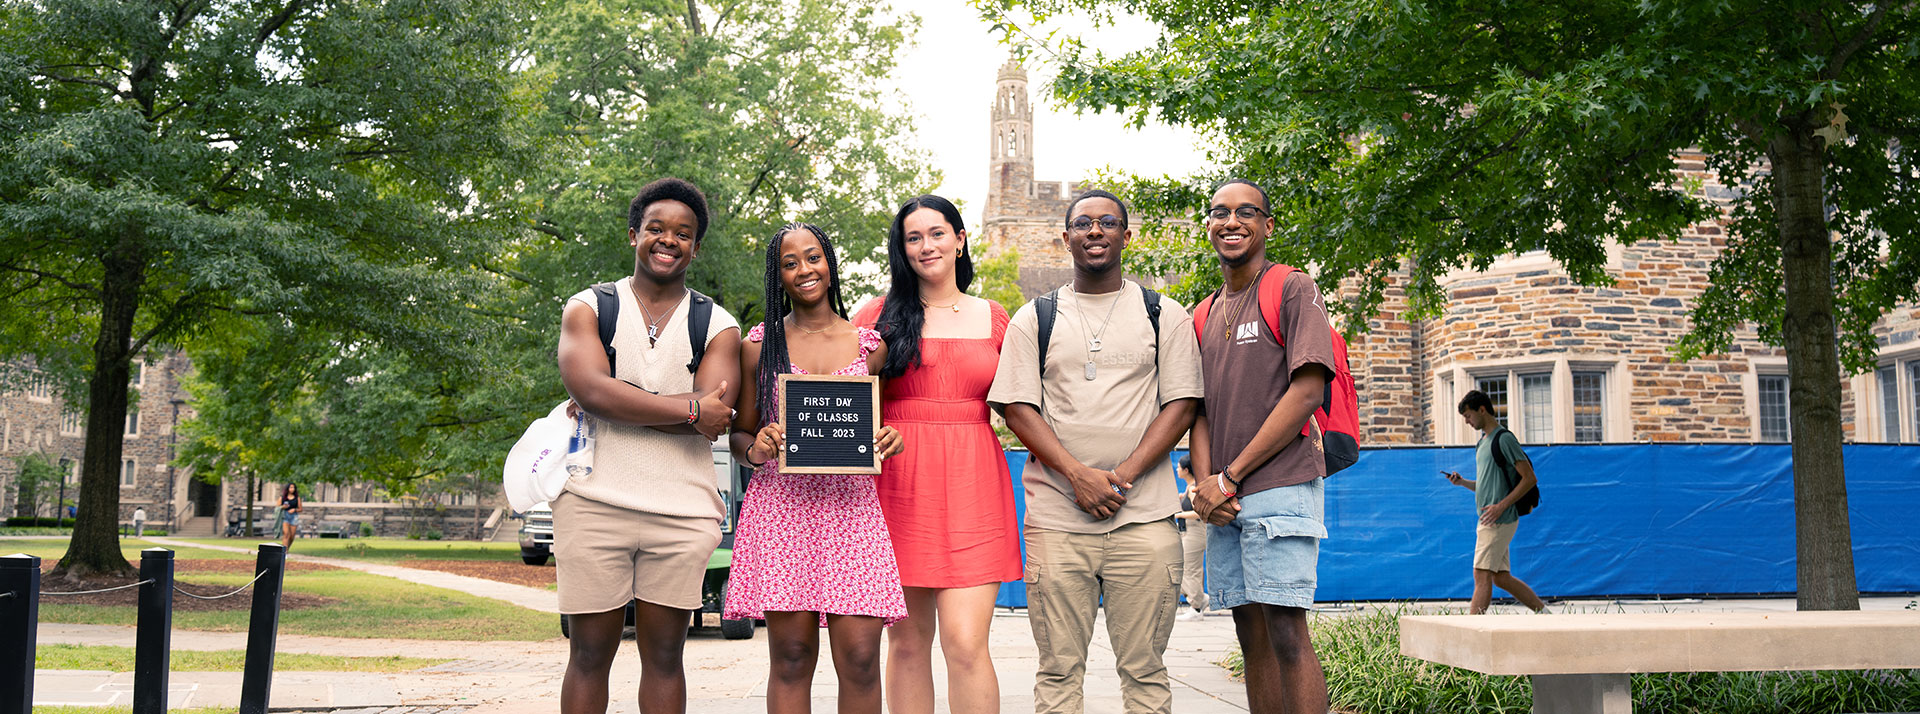 Five students standing on a west campus path with Duke architecture in the background holding a sign that says, “First day of class Fall 2023”